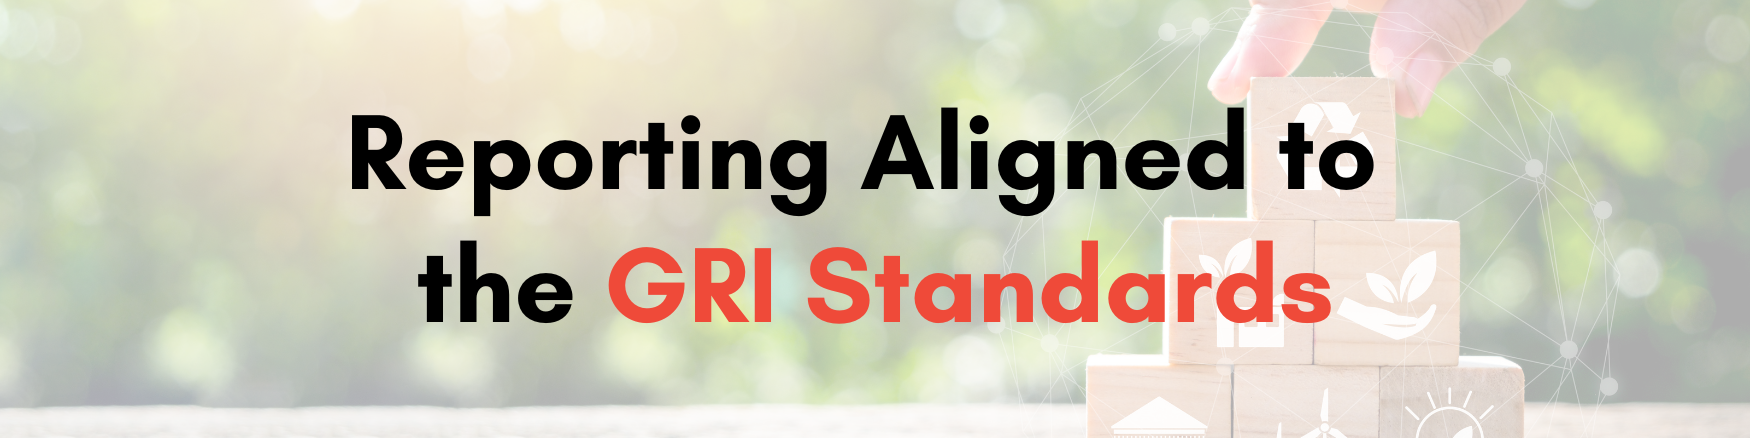 Reporting Aligned to the GRI Standards